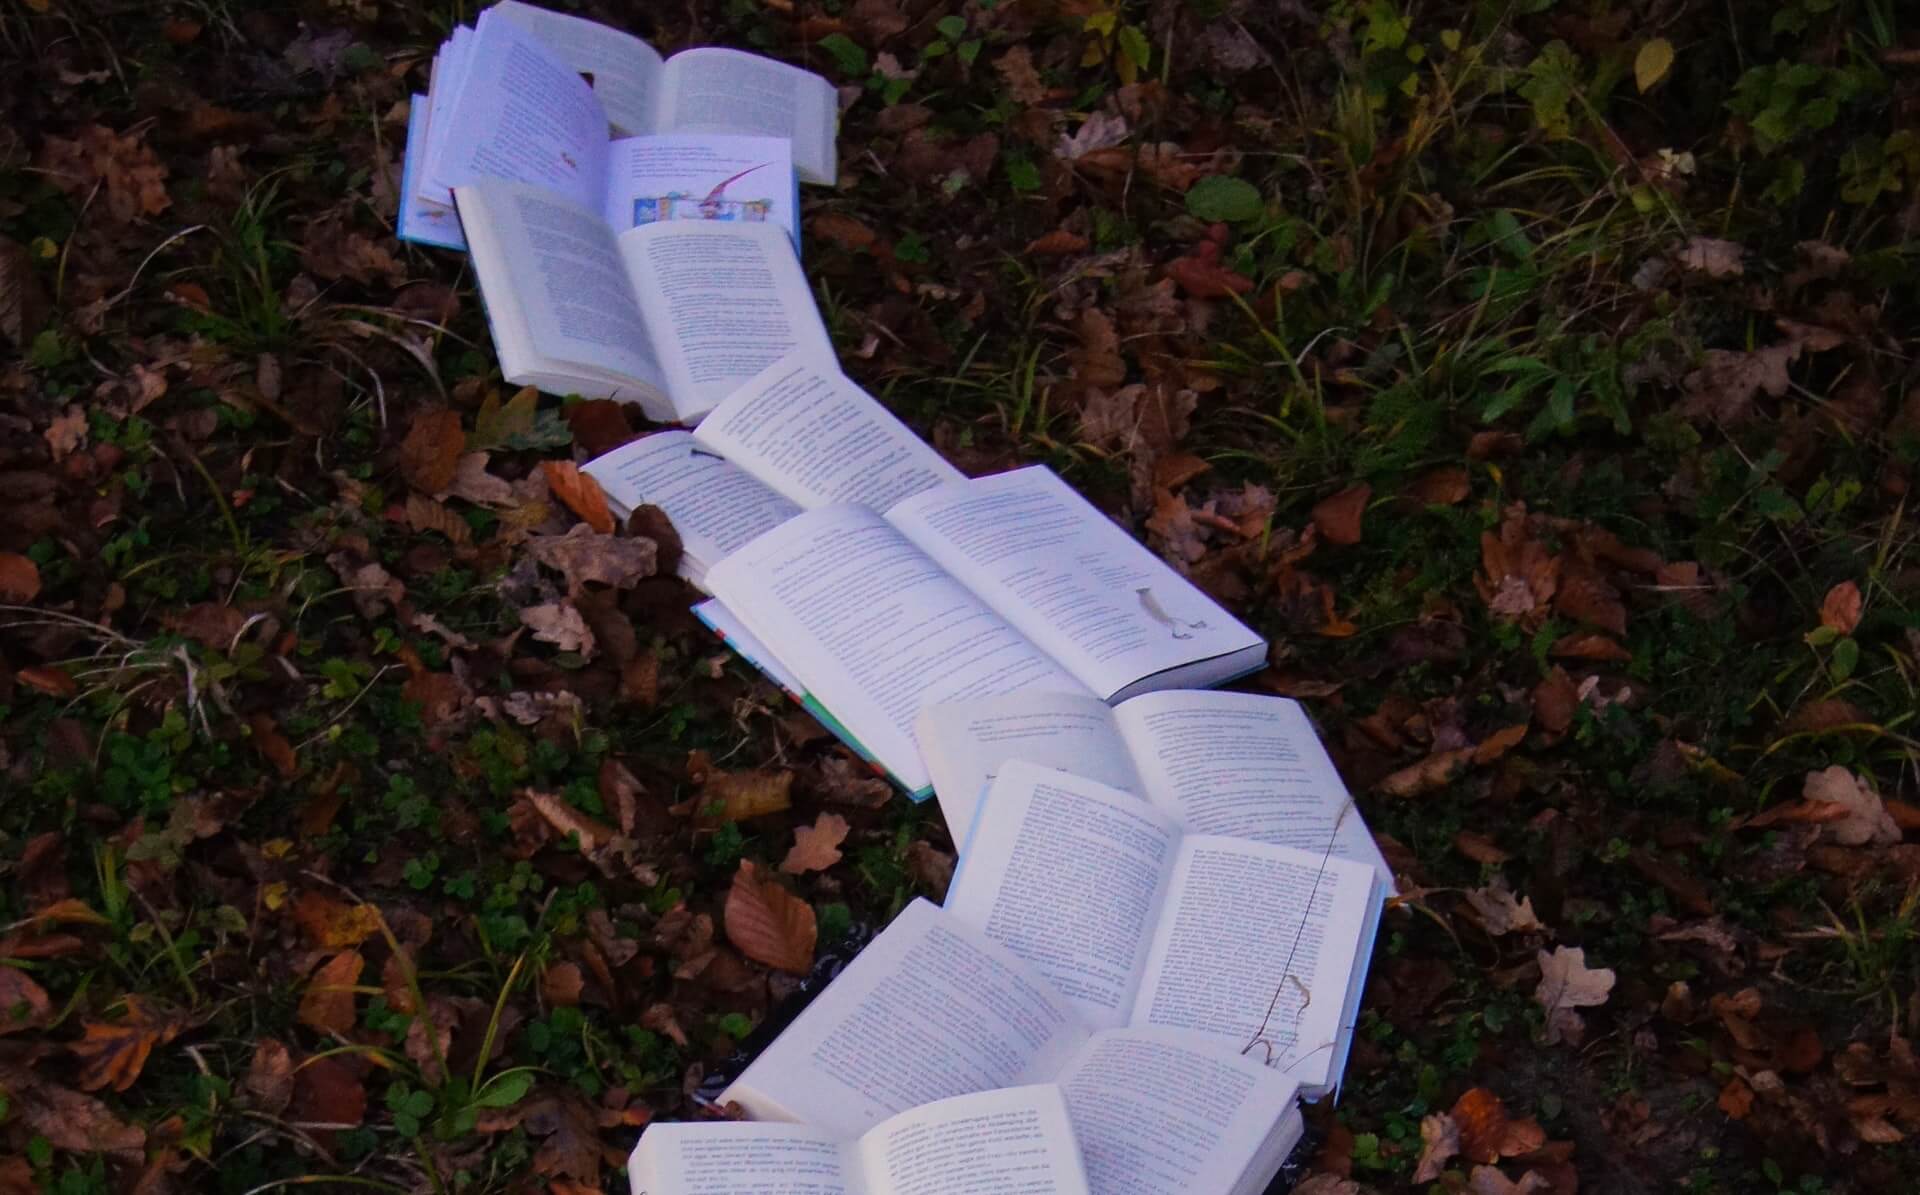 Books laid out on the ground in some leaves.